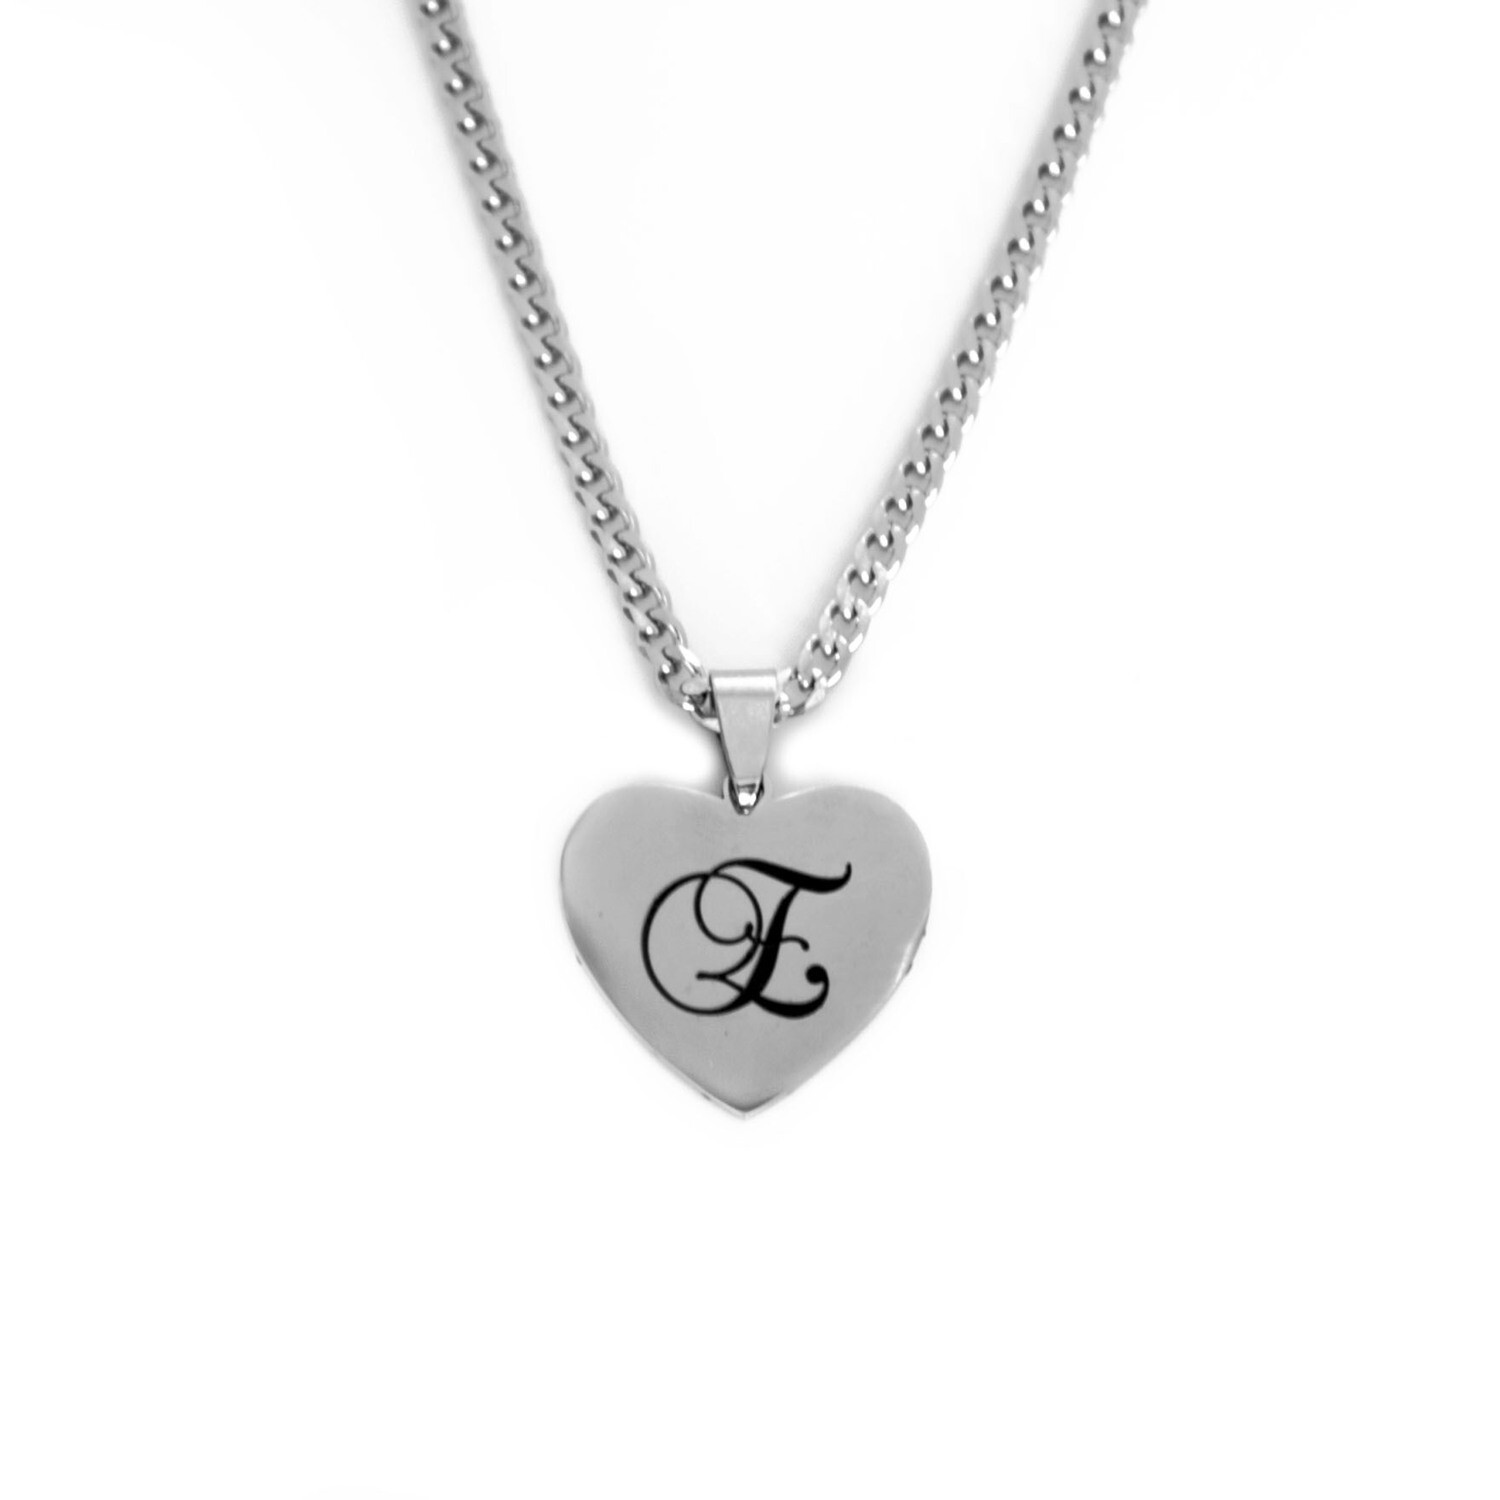 Personalised Engraved Monogram Heart Necklace